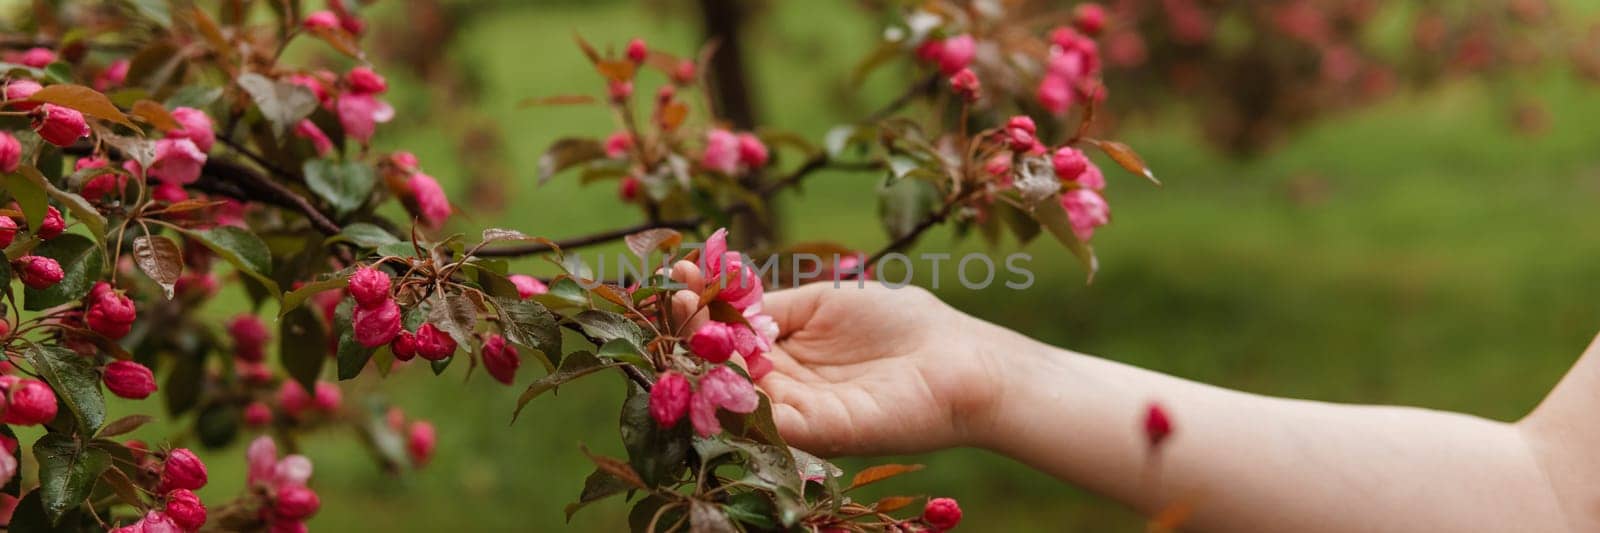 Pink flowers of a blossoming apple tree in a woman's hand. by Annu1tochka